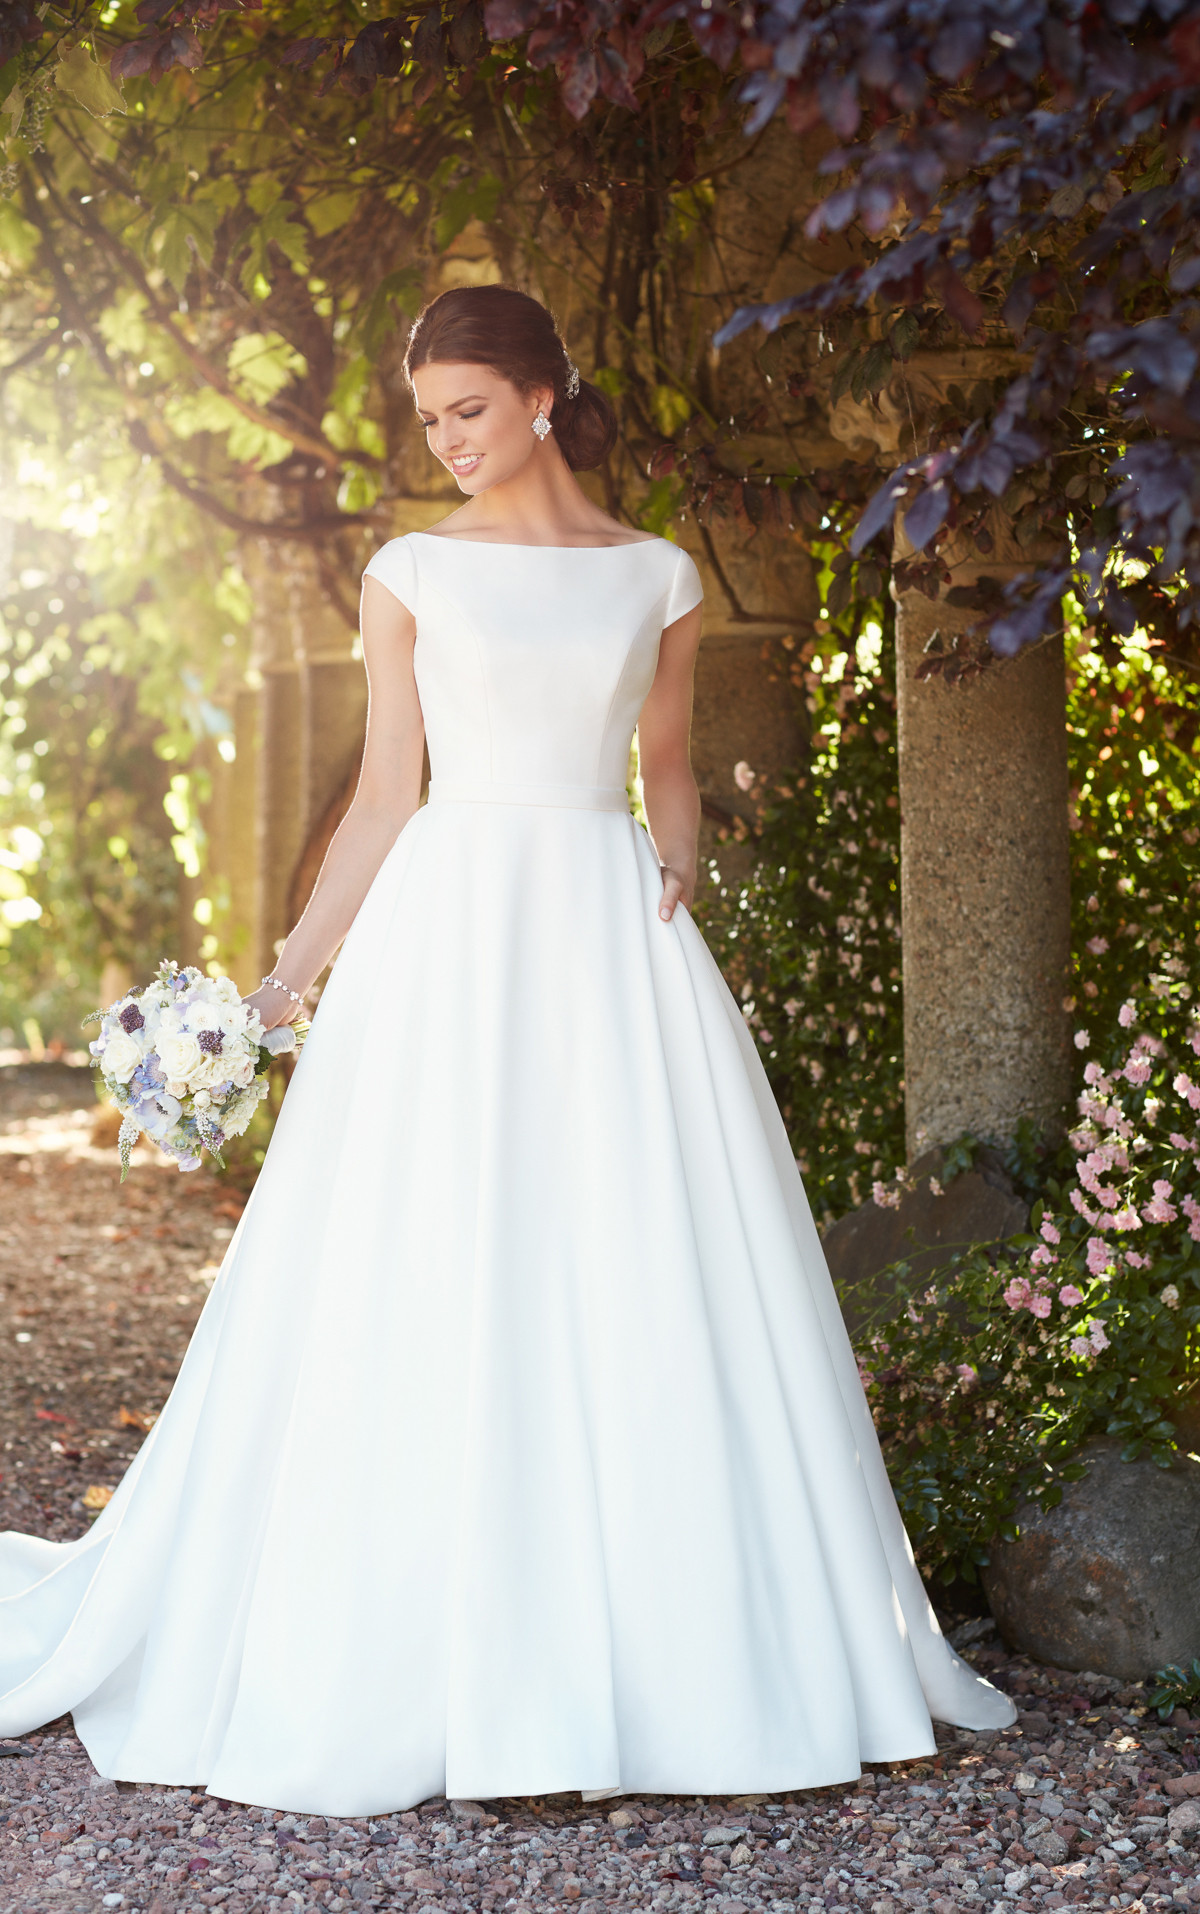 Modest Wedding Gowns With Sleeves
 Modest Wedding Dress with Sleeves